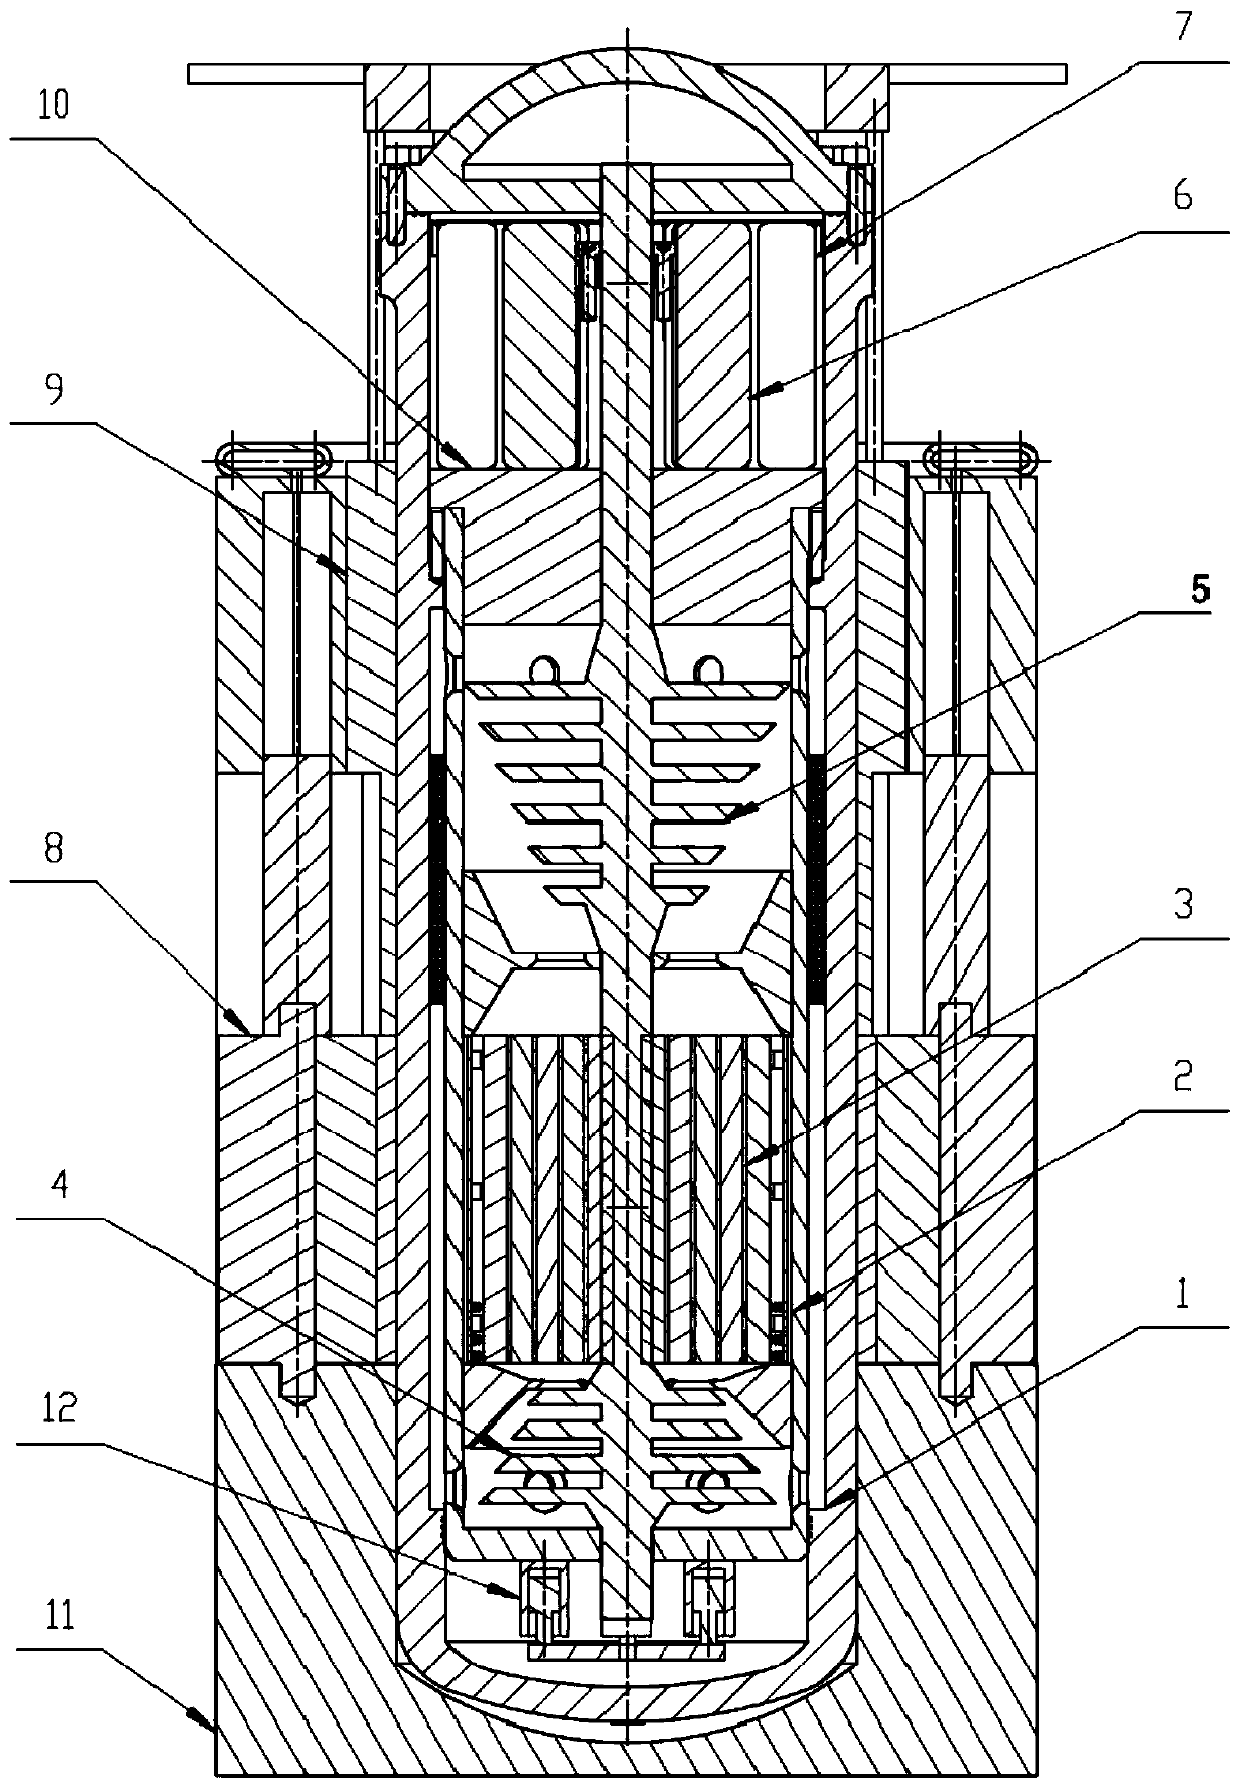 Thermoelectric conversion integrated reactor with turbine